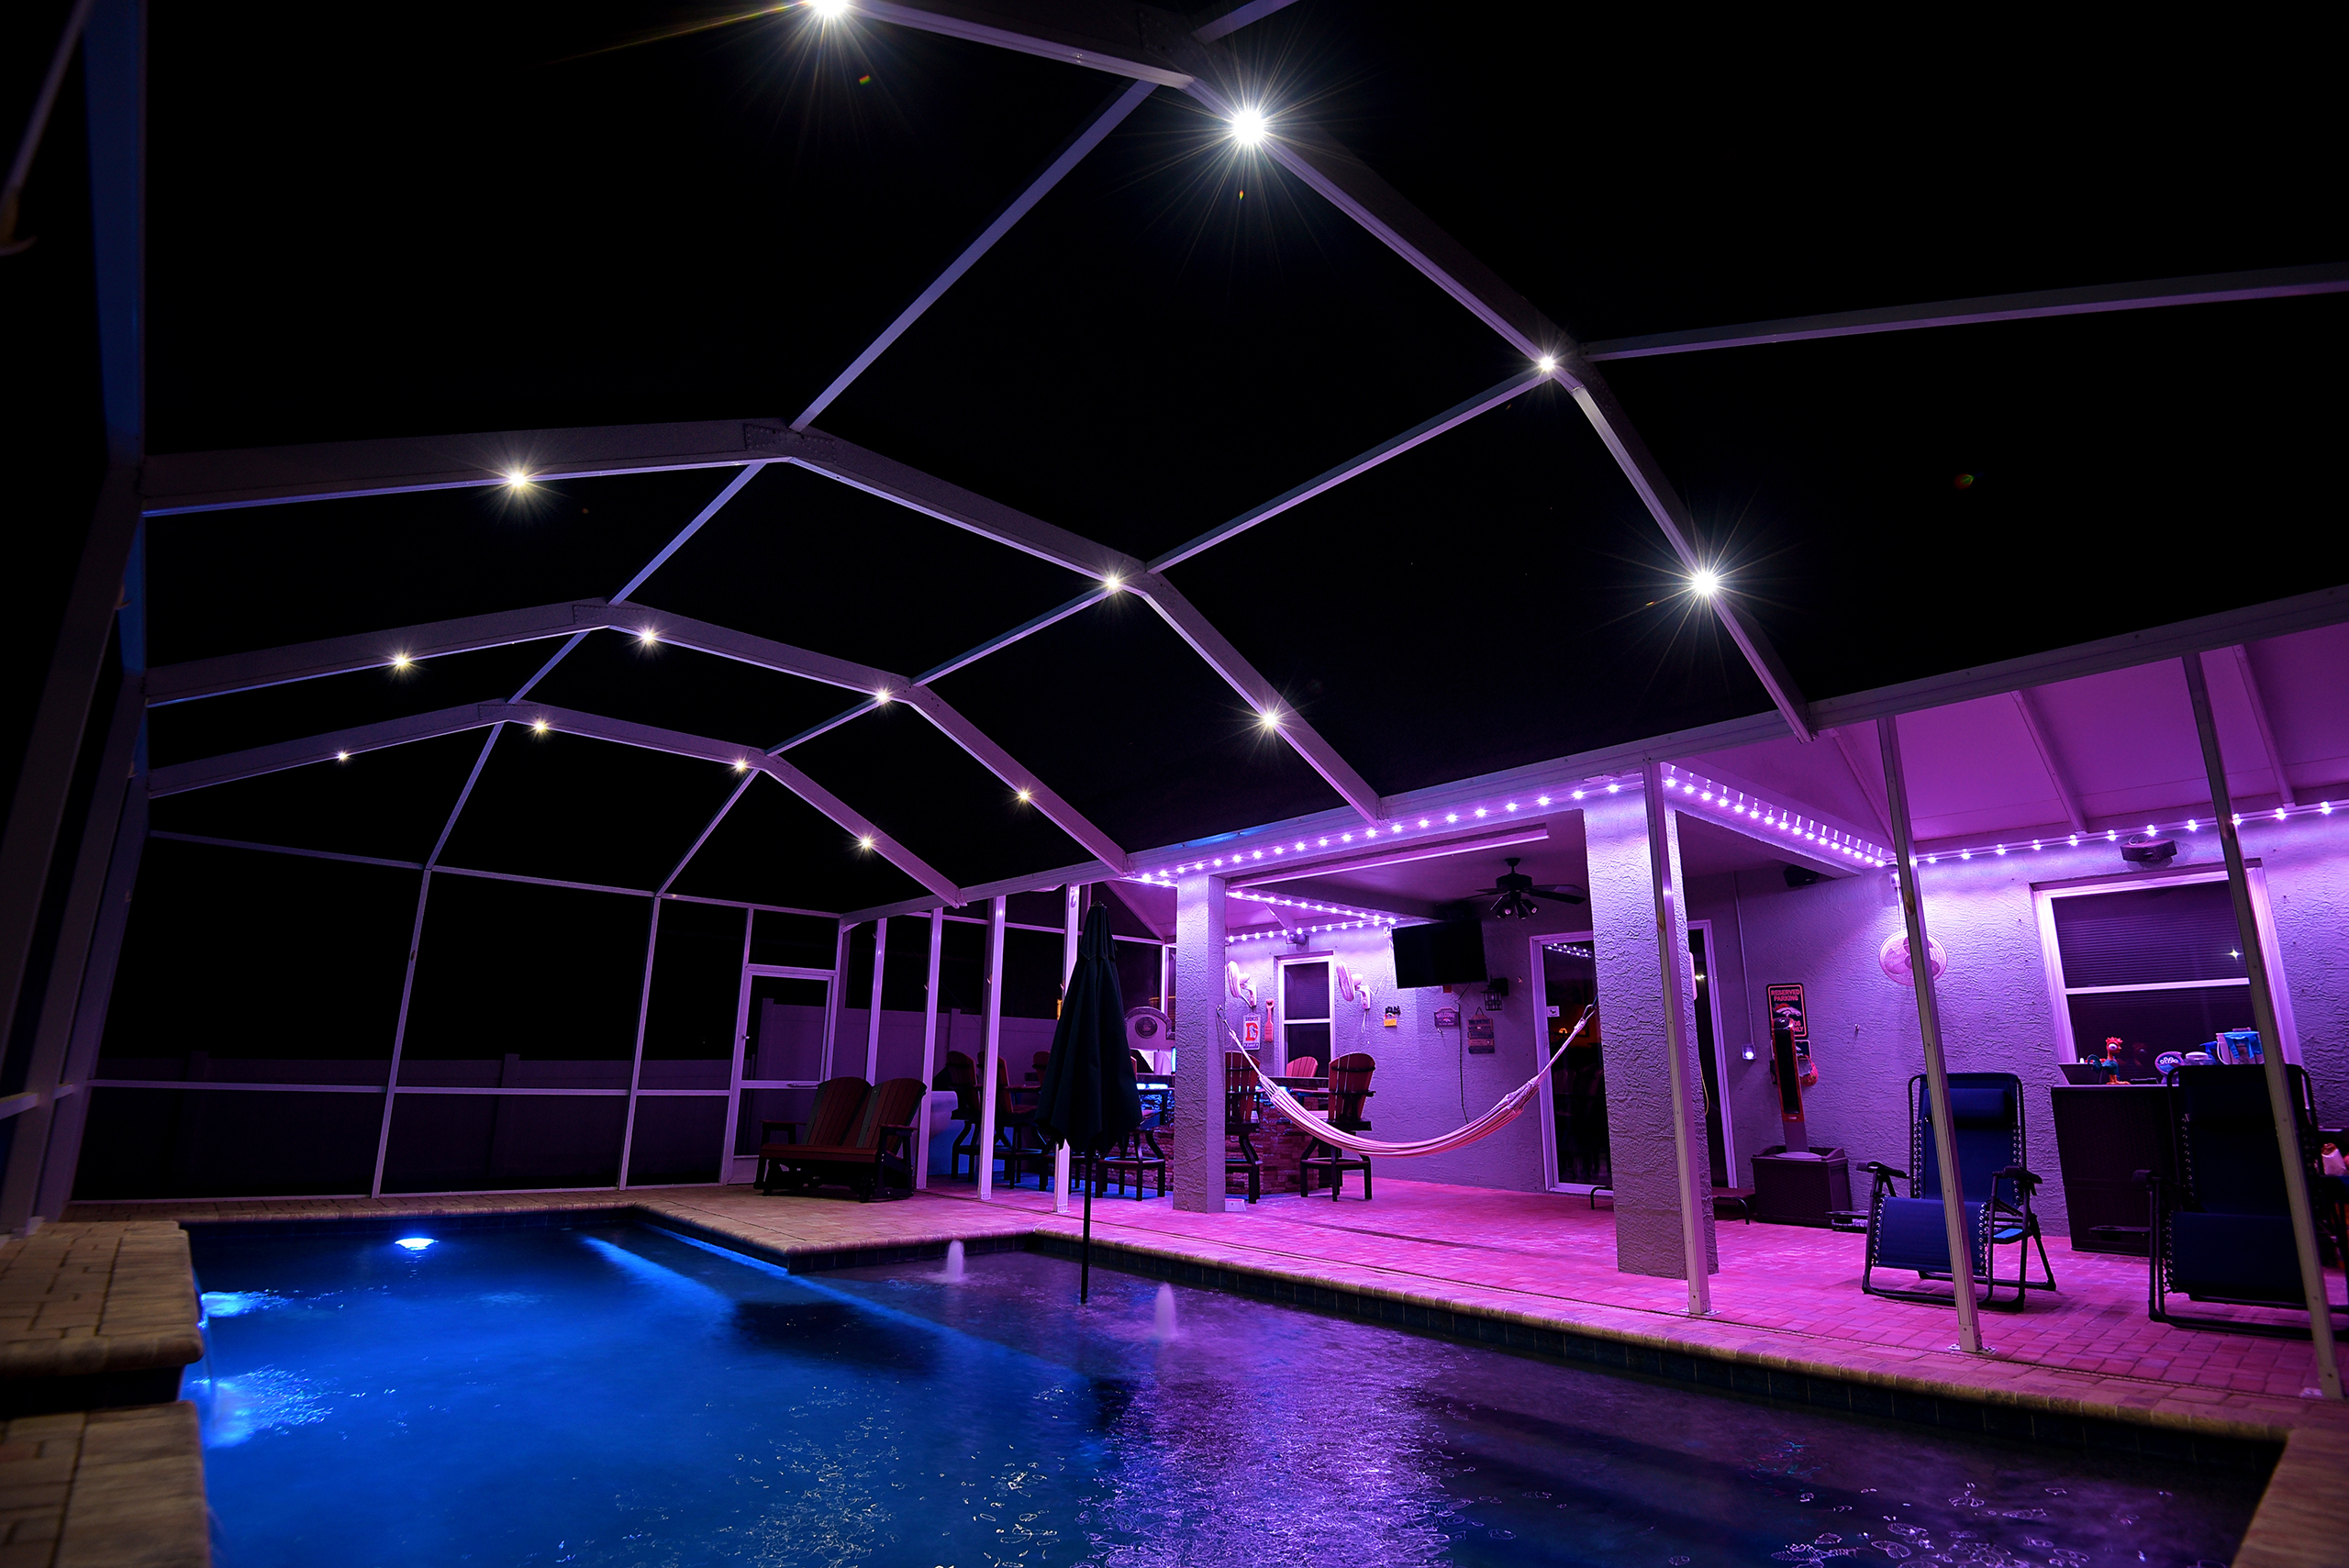 Enclosed pool house at dusk with overhead lighting and green accent lighting around the base.